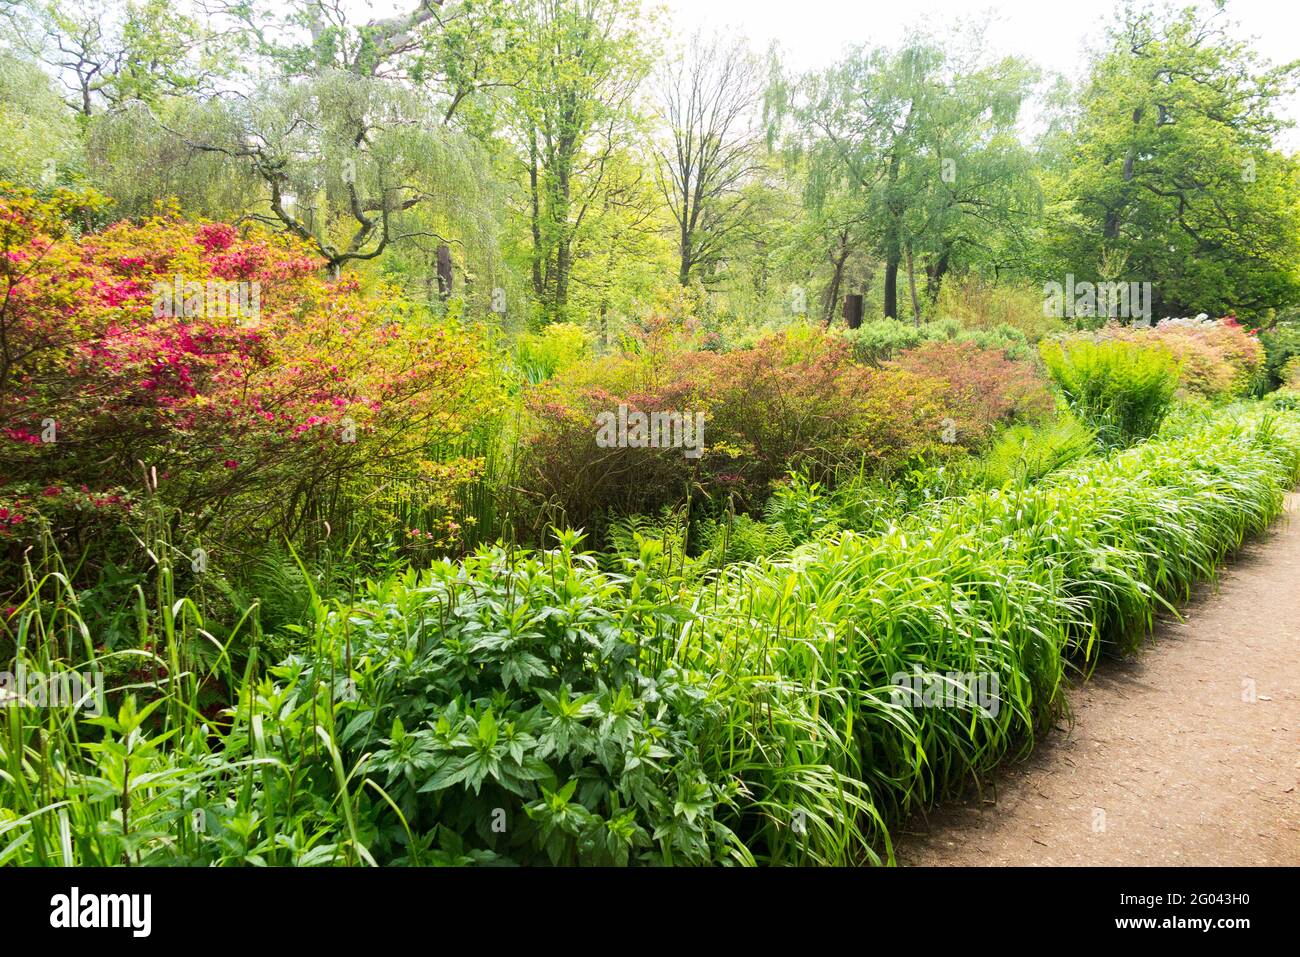 Inside the Isabella Plantation with plant border / borders to the beds and path. Richmond Park. UK. The Isabella Plantation contains many acid soil loving plants such as rhododendrons azaleas and camellias.  (123) Stock Photo